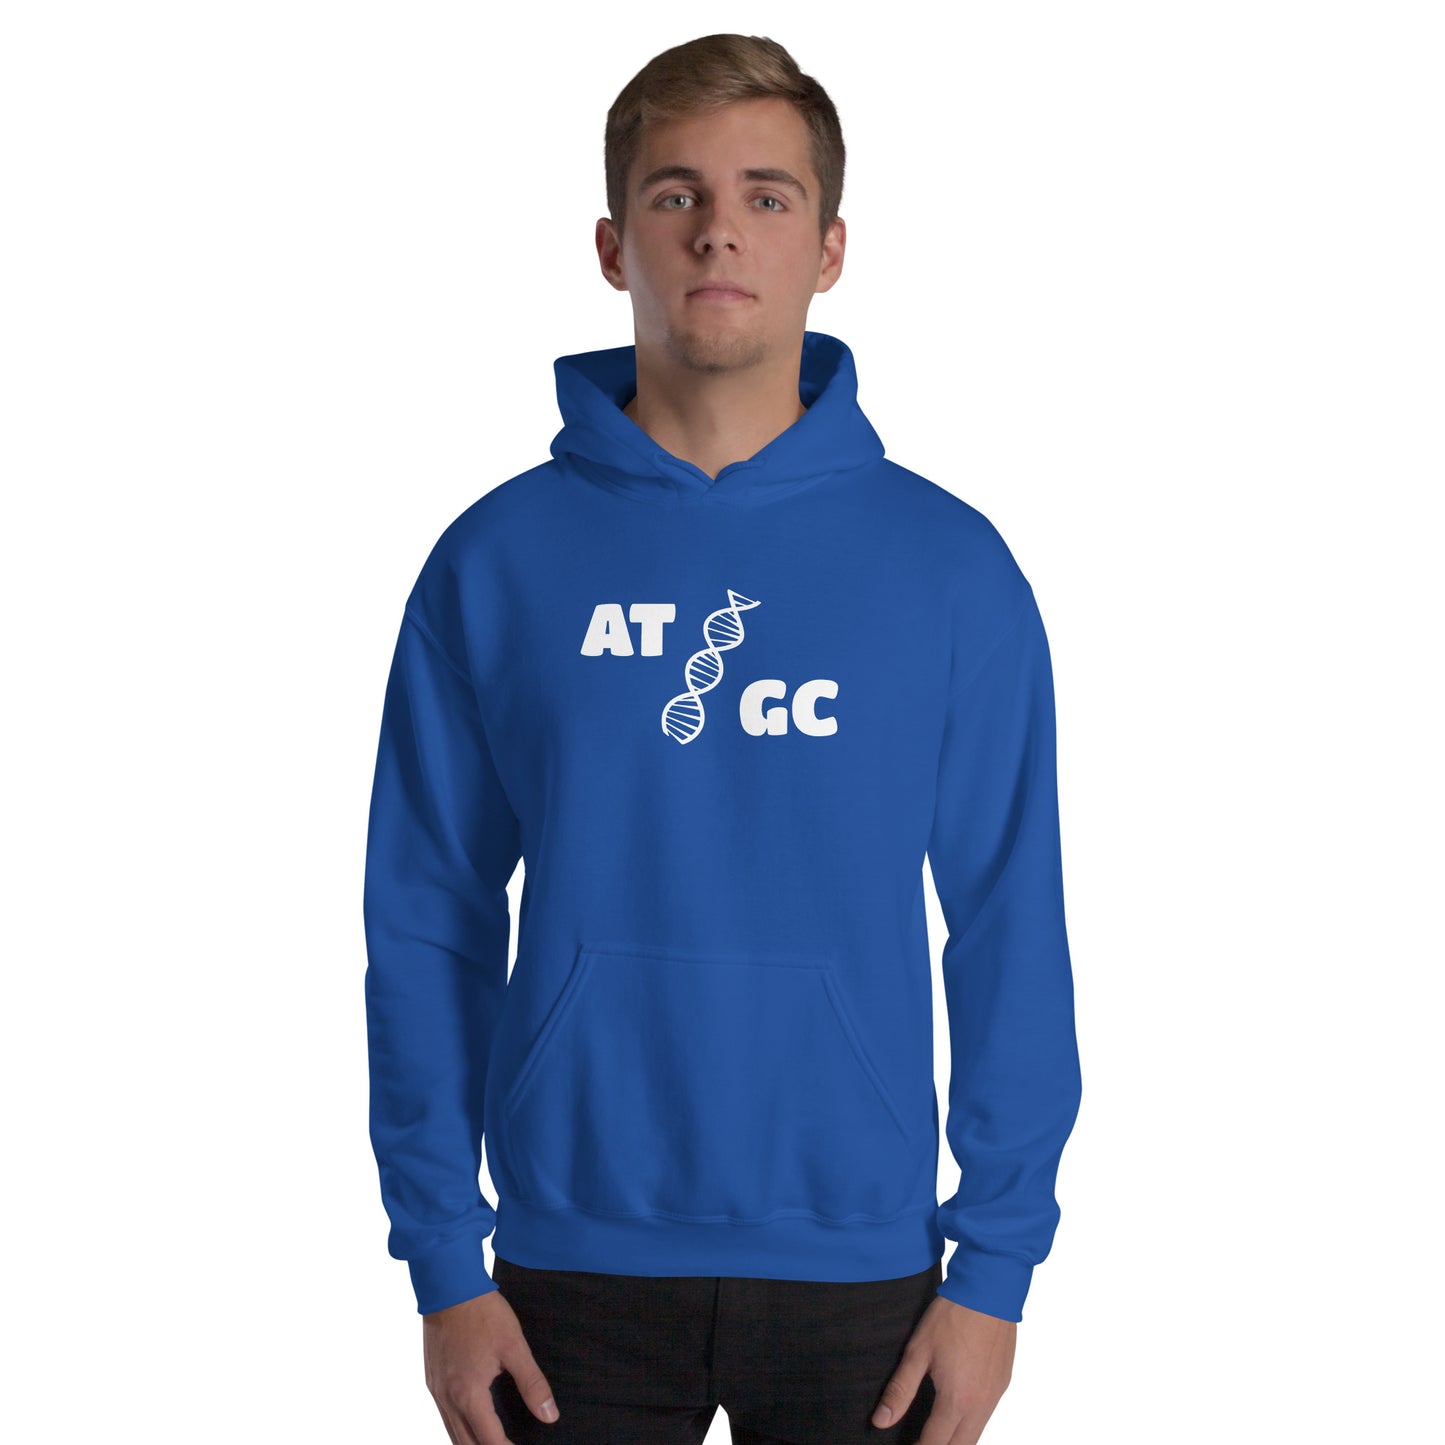 Men with royal blue hoodie with image of a DNA string and the text "ATGC"